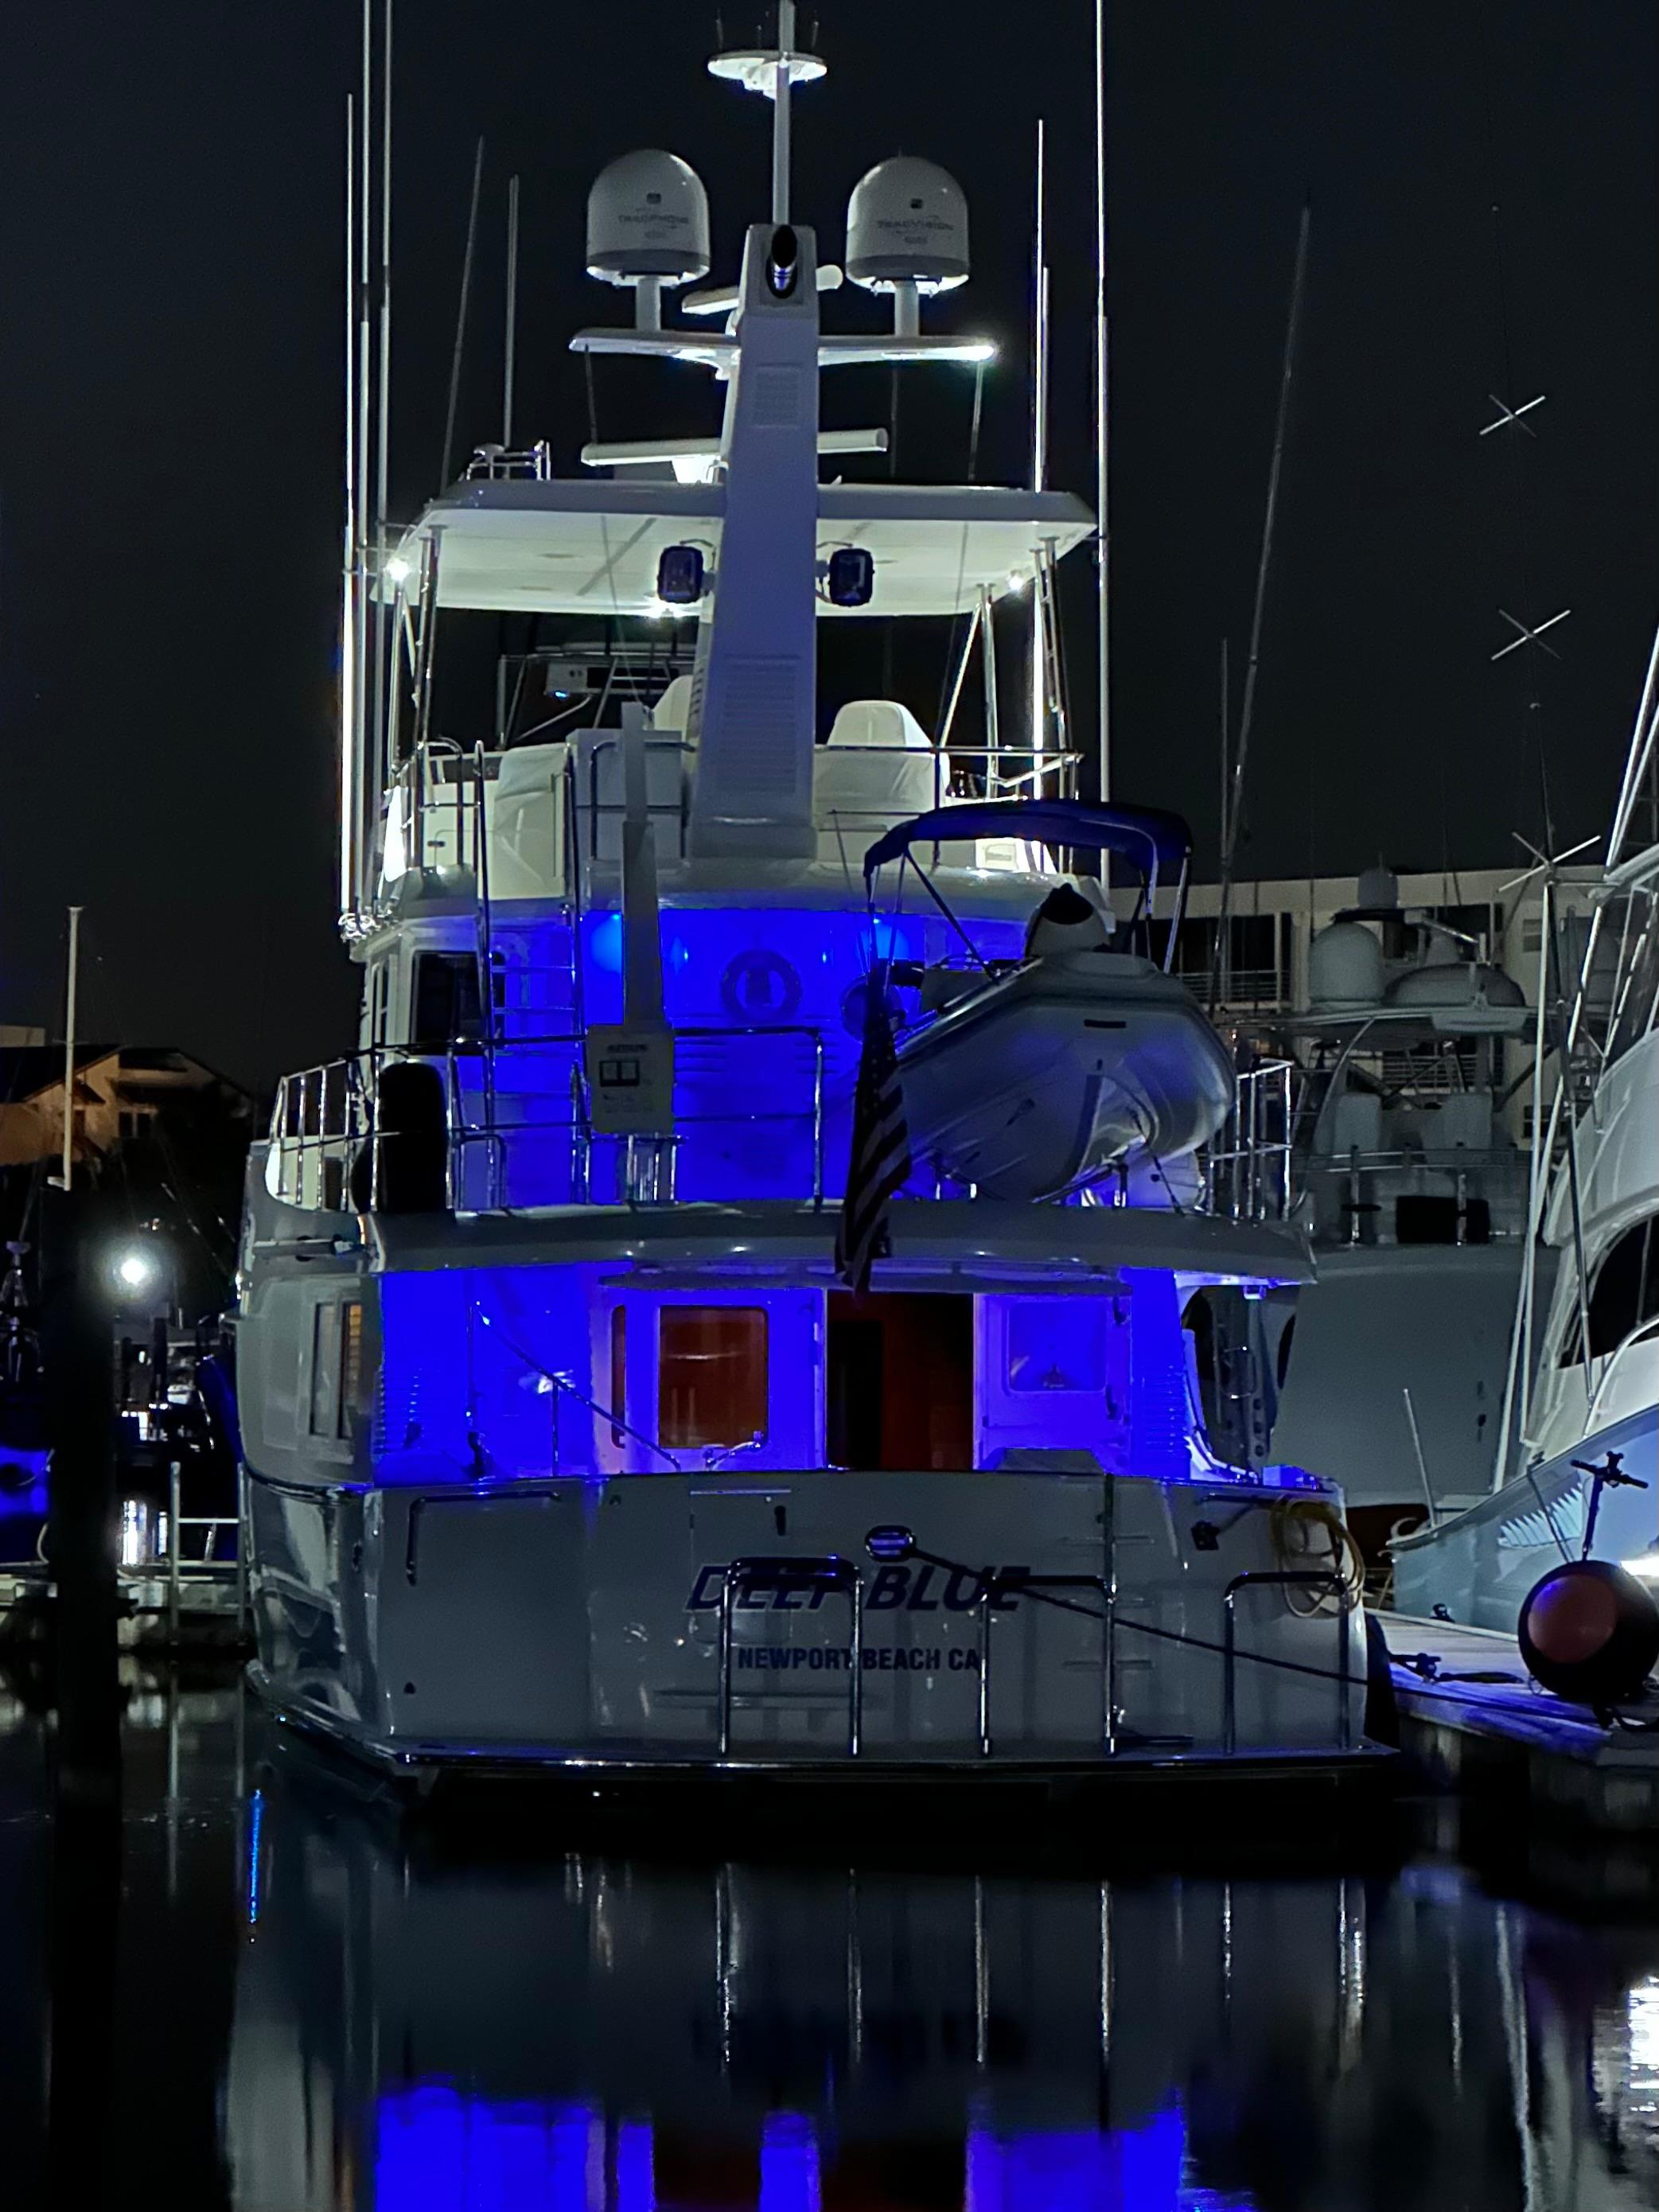 Stern View at Night